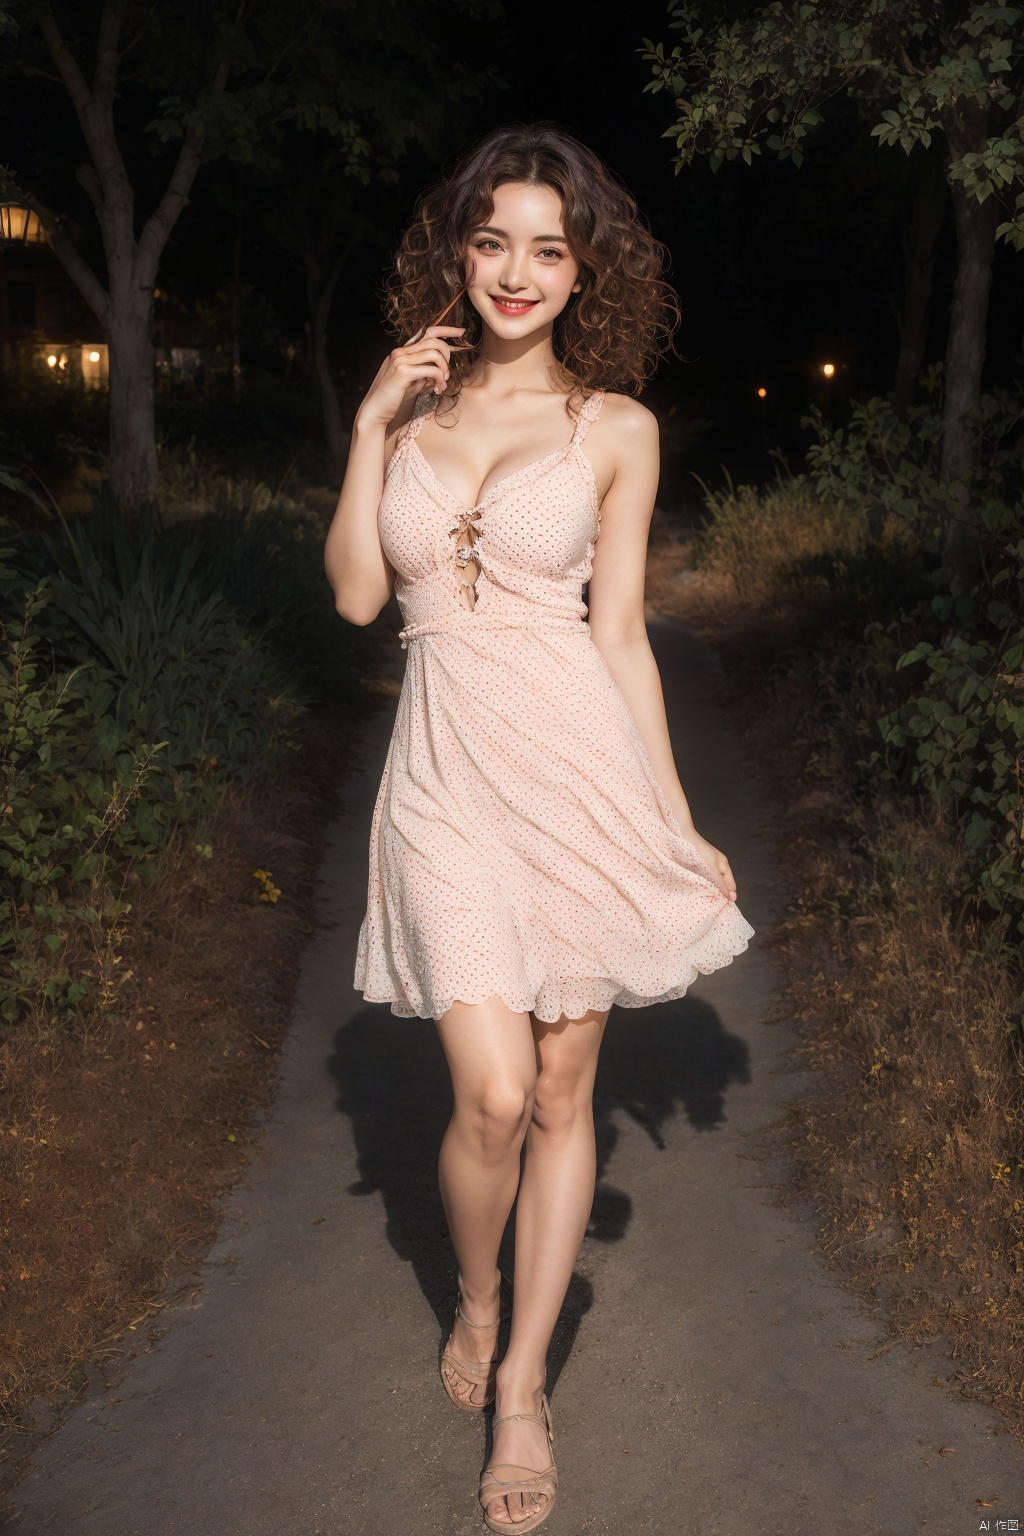 sensual 20 year old busty model posing seductively while looking at viewer,  curly finger wavy hair,  night,  dynamic scene,  brown hair,  vintage haircut,  open smile,  full body,  in a polkadot dress
wearing spotted short dress,  beautiful face,  32K,  top quality,  ultra detailed skin and face,  dark lighting,  stock picture.,real,photo, 